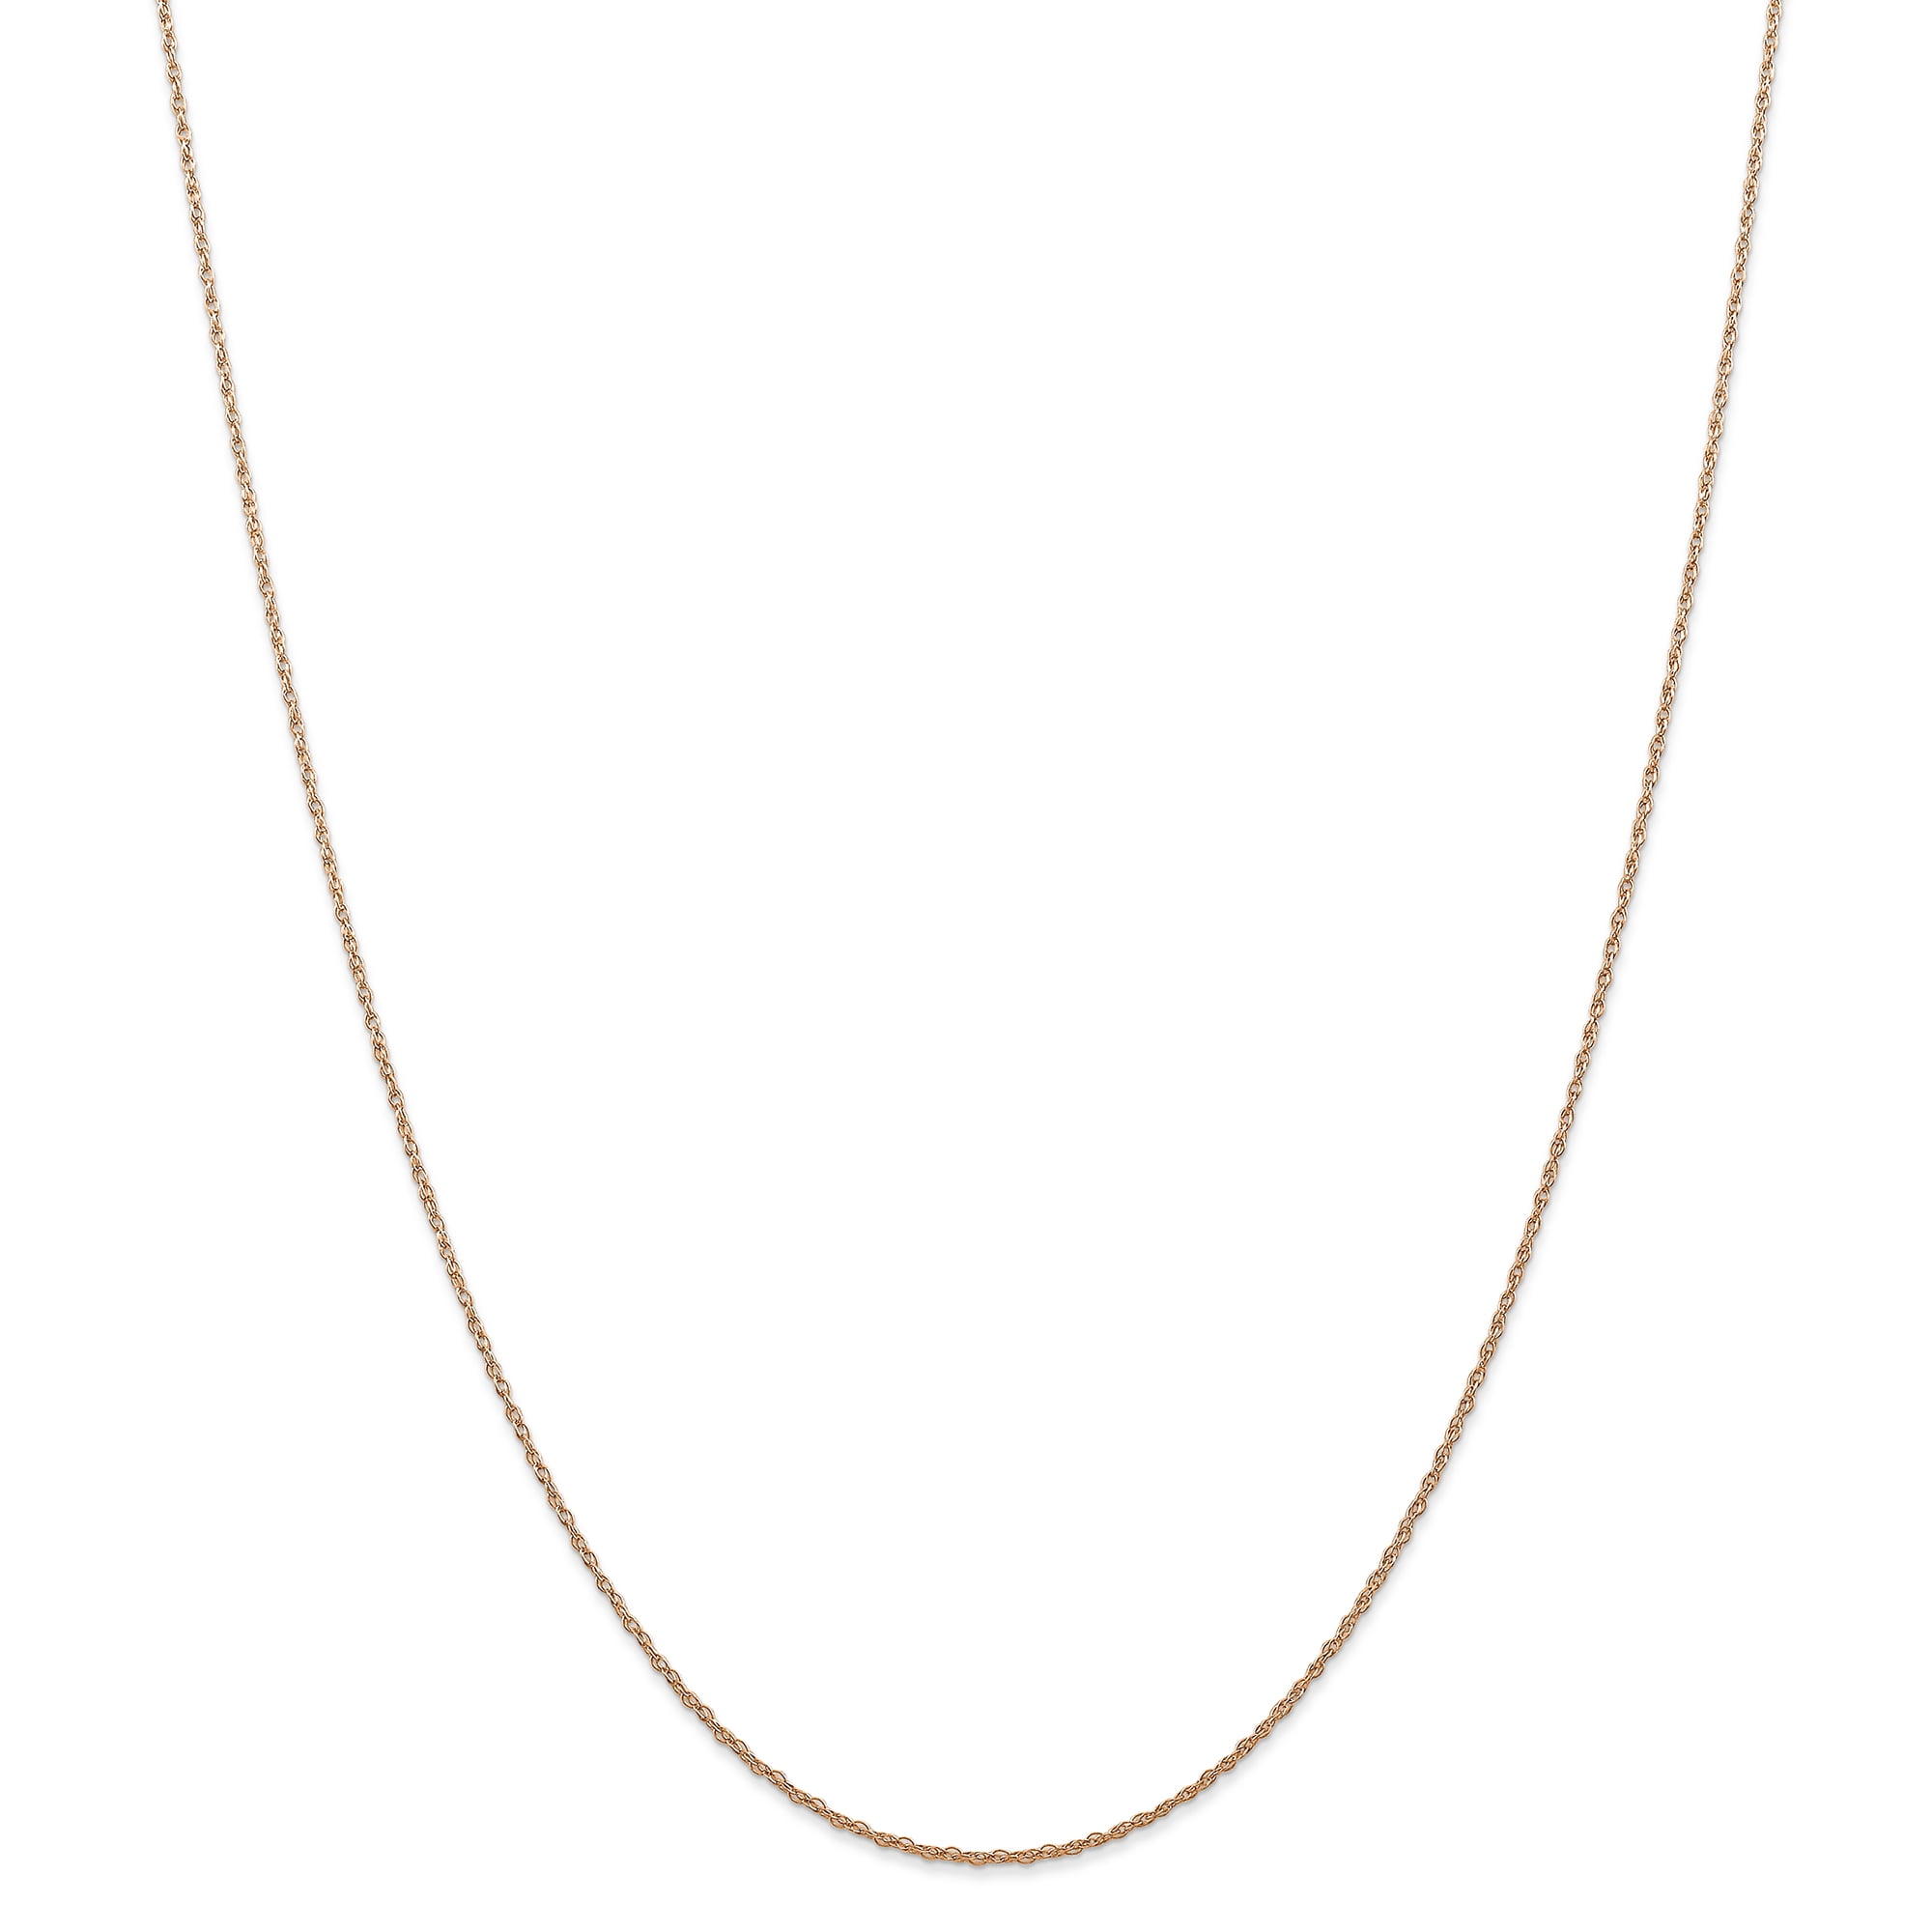 Beautiful 14k Rose Gold .7 mm Carded Cable Rope Chain 